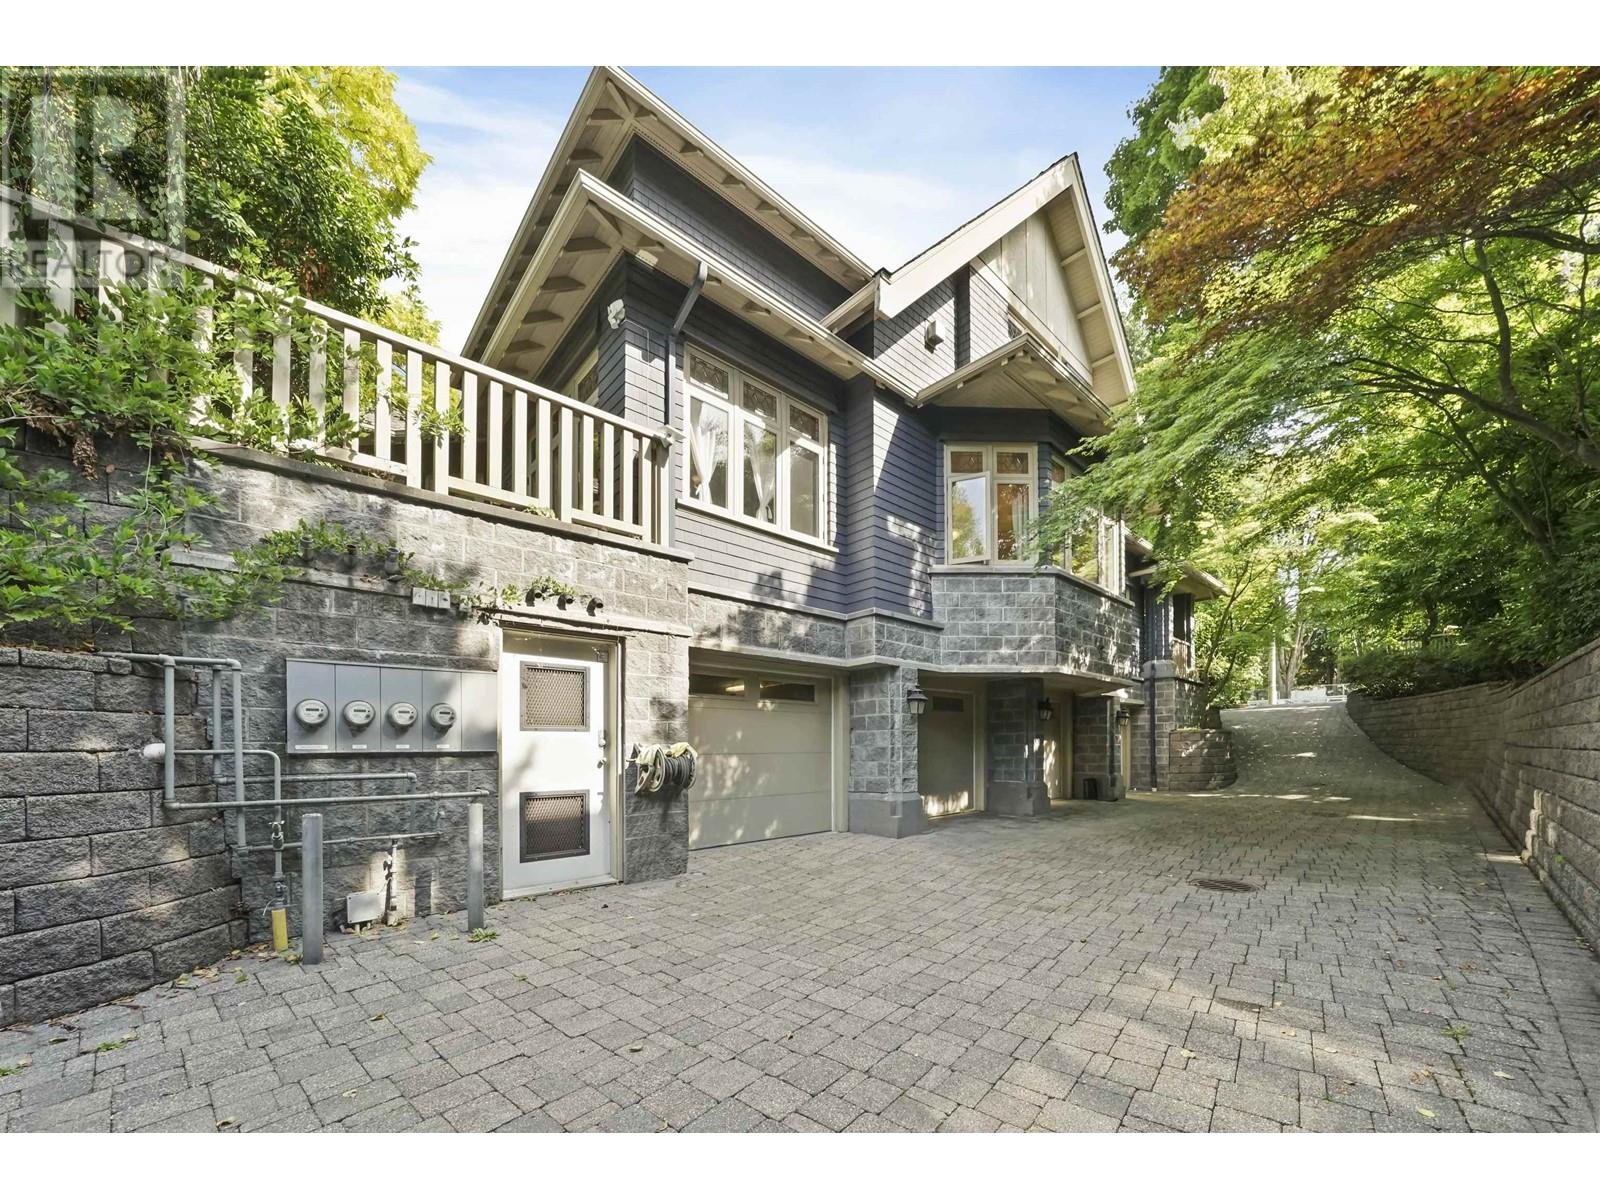 Listing Picture 25 of 40 : 1637 ANGUS DRIVE, Vancouver / 溫哥華 - 魯藝地產 Yvonne Lu Group - MLS Medallion Club Member